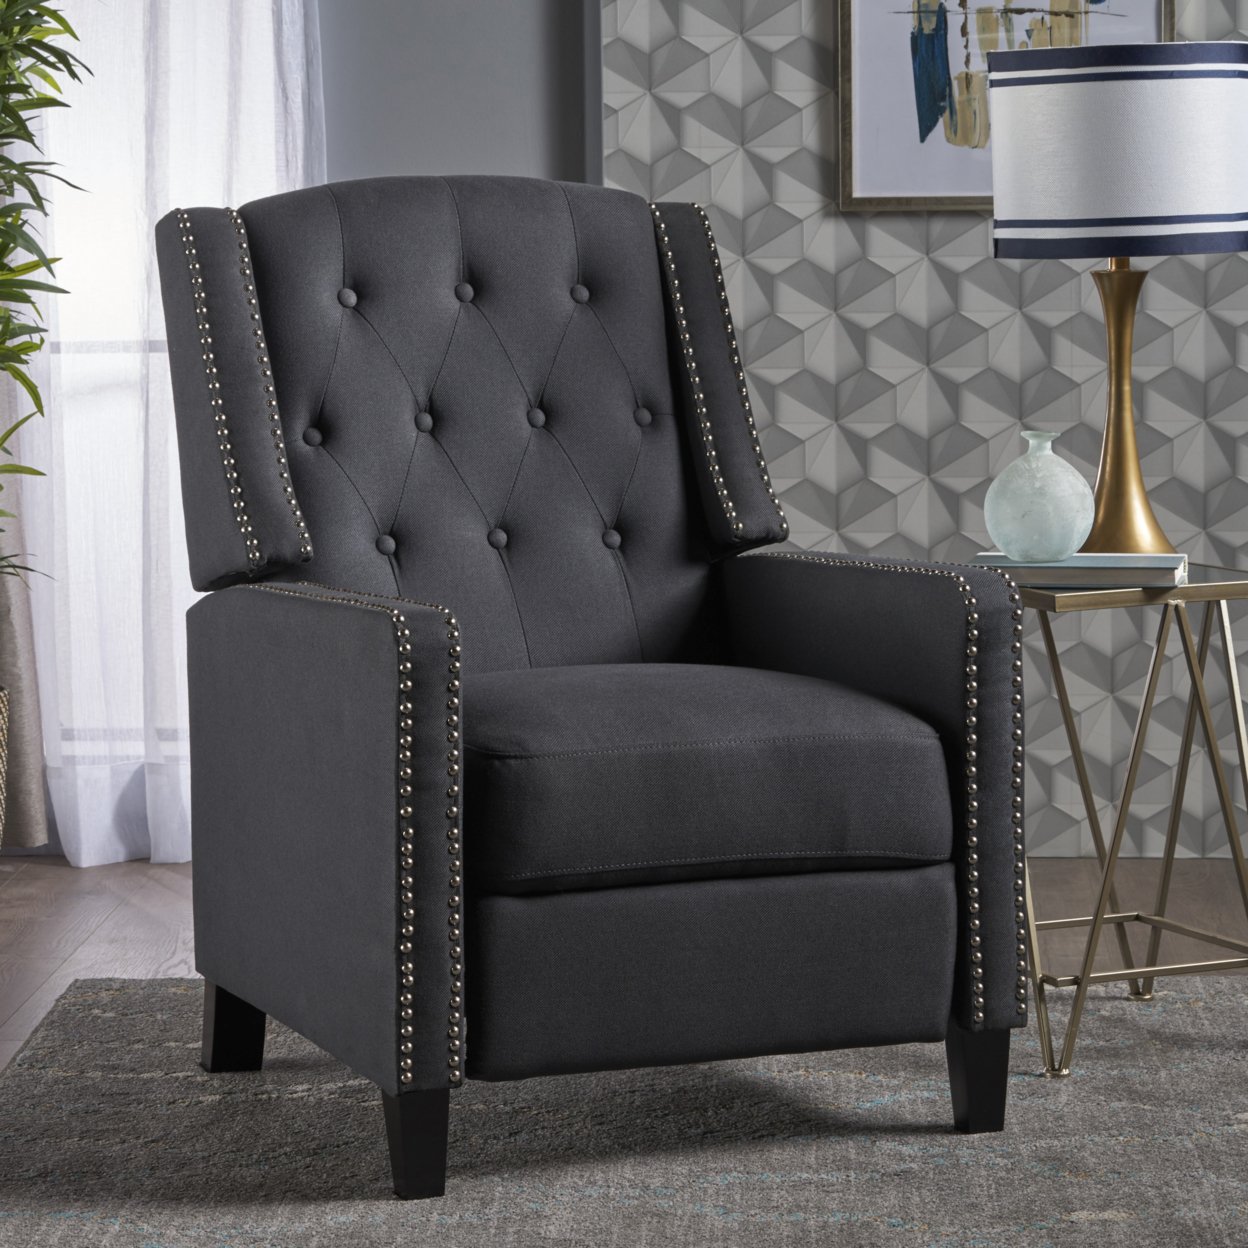 Ingrid Tufted Back Fabric Recliner Chair - Coffee